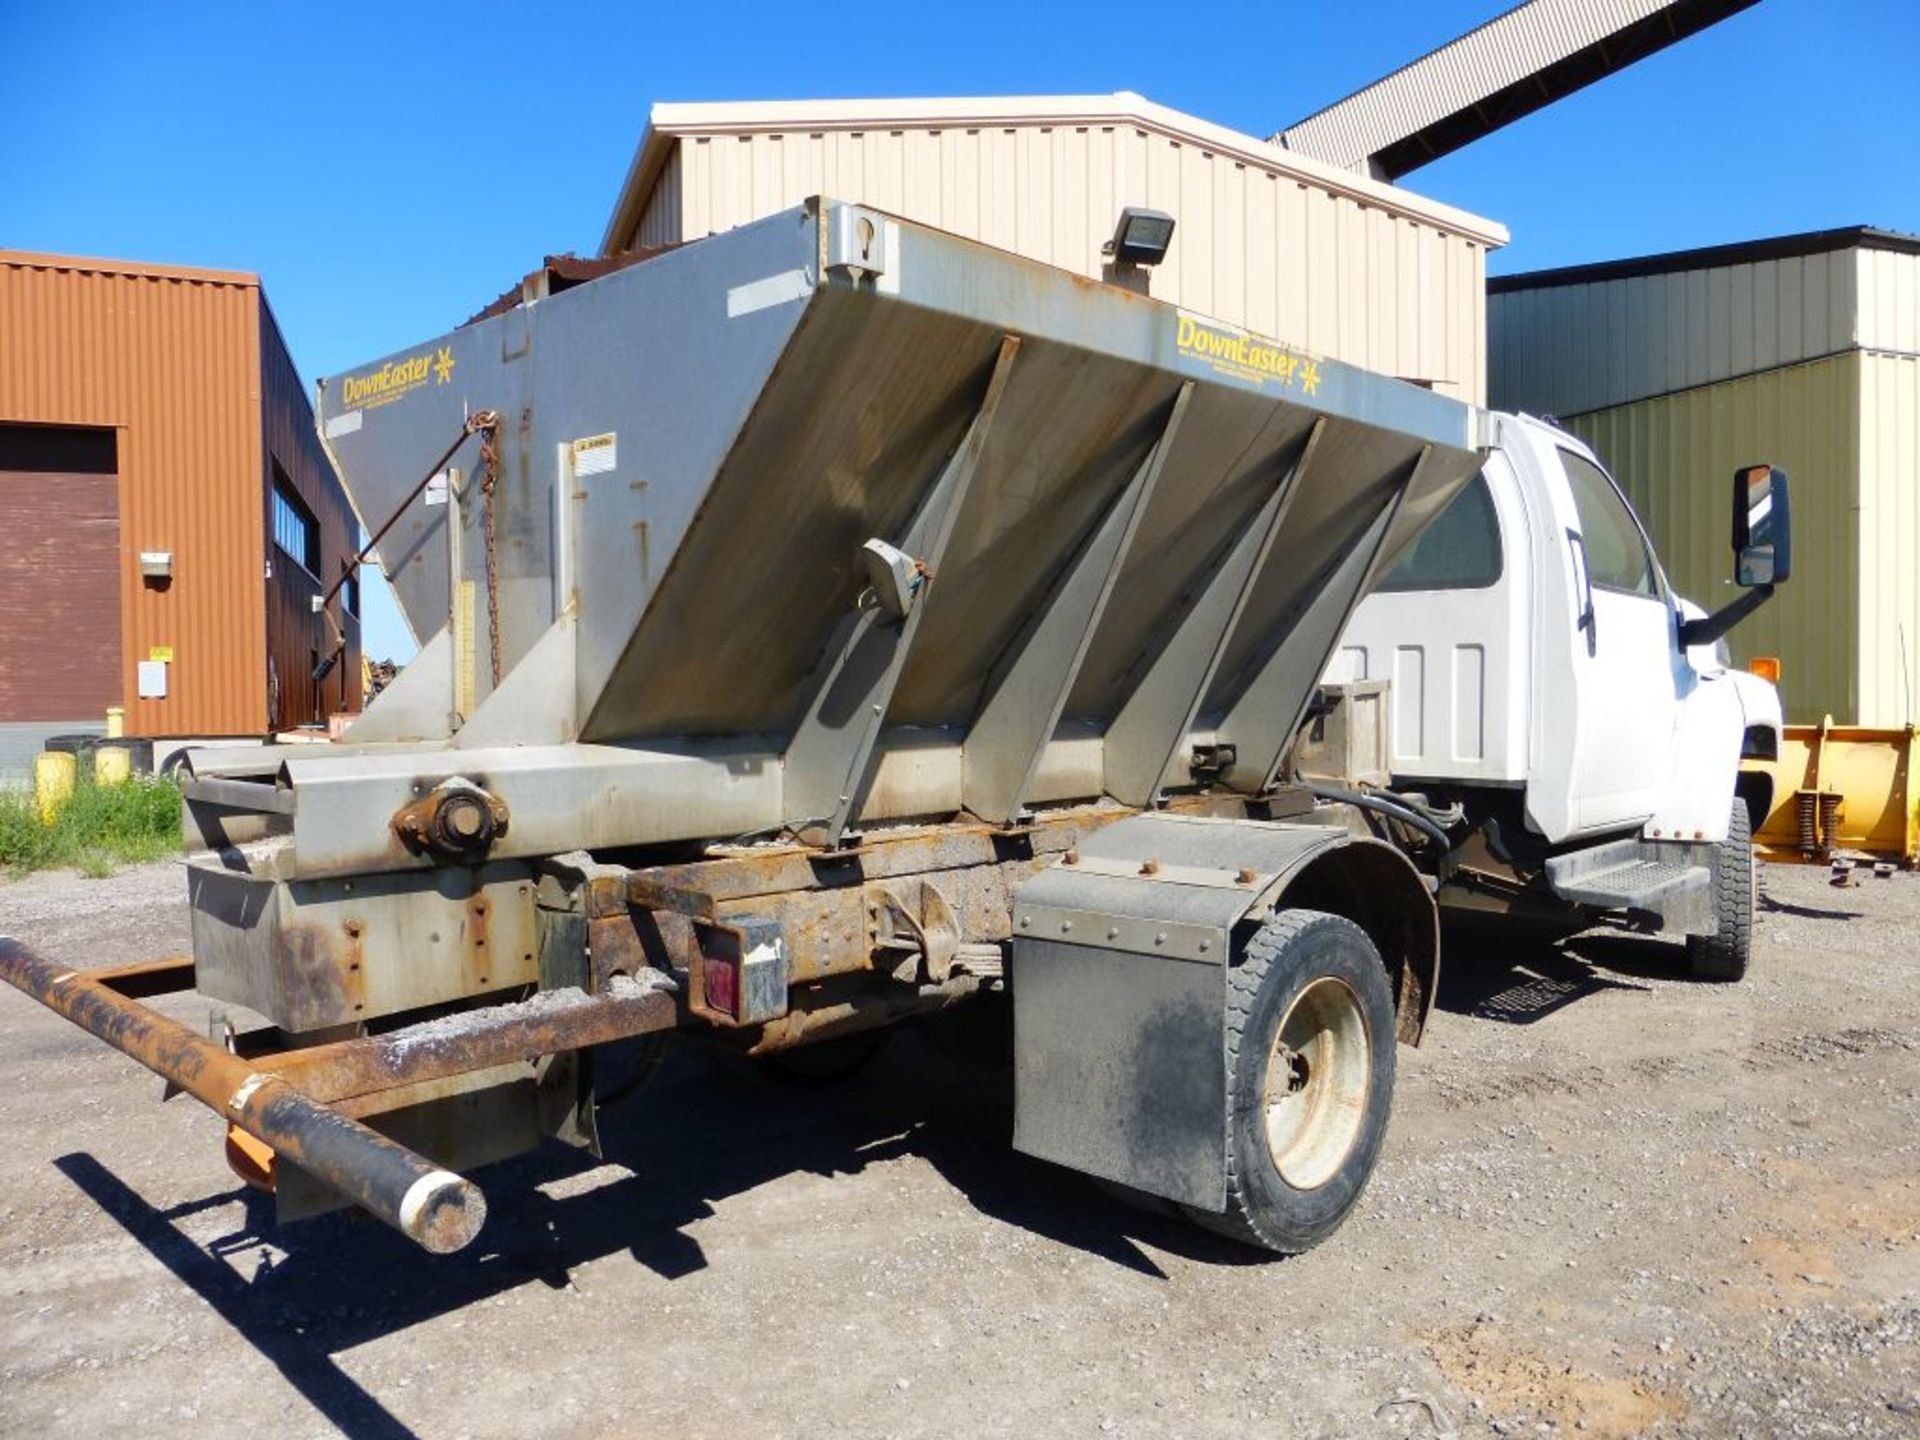 2008 GMC 5500 4x4 Plow Truck with Spreader | Vin No. 1GDE5C3G39F404627; GVWR: 19,500; 15,312 - Image 13 of 29